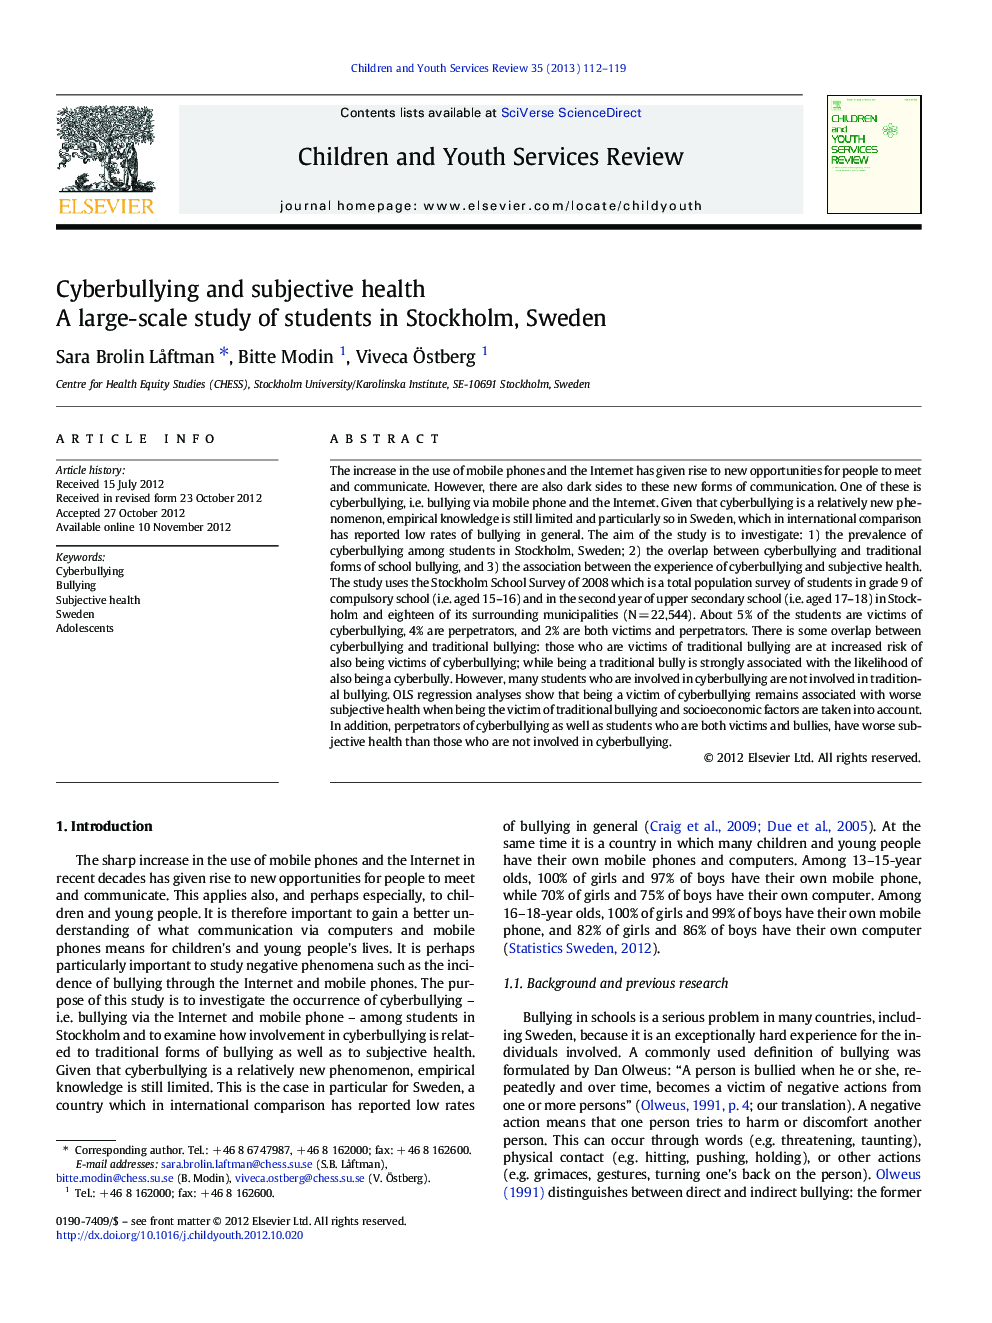 Cyberbullying and subjective health: A large-scale study of students in Stockholm, Sweden